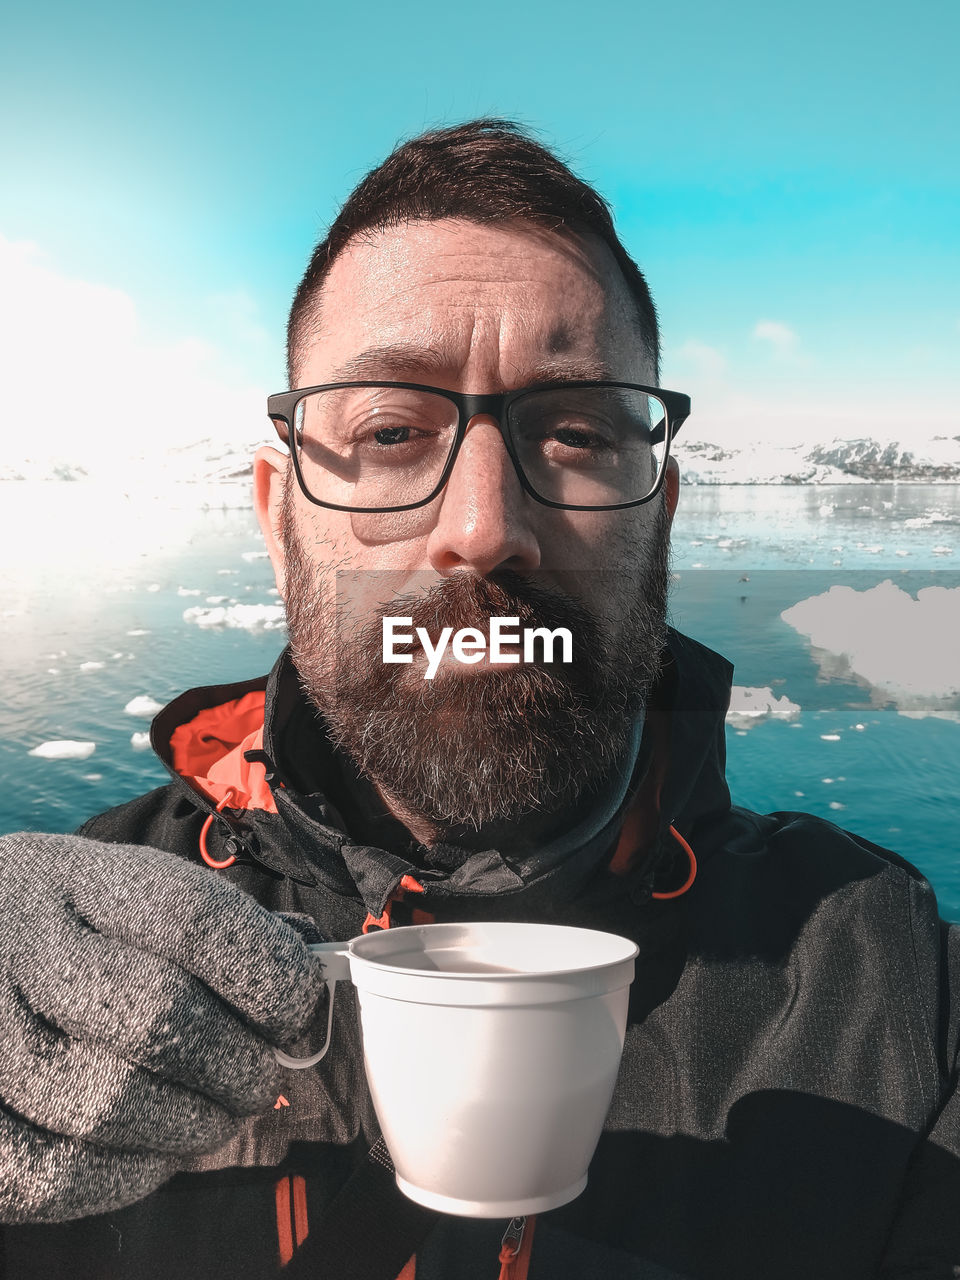 adult, one person, men, glasses, portrait, water, beard, facial hair, eyeglasses, nature, sky, drink, sea, food and drink, refreshment, person, headshot, cold temperature, front view, mature adult, drinking, leisure activity, looking at camera, human face, cup, coffee, lifestyles, winter, clothing, emotion, sunlight, outdoors, relaxation